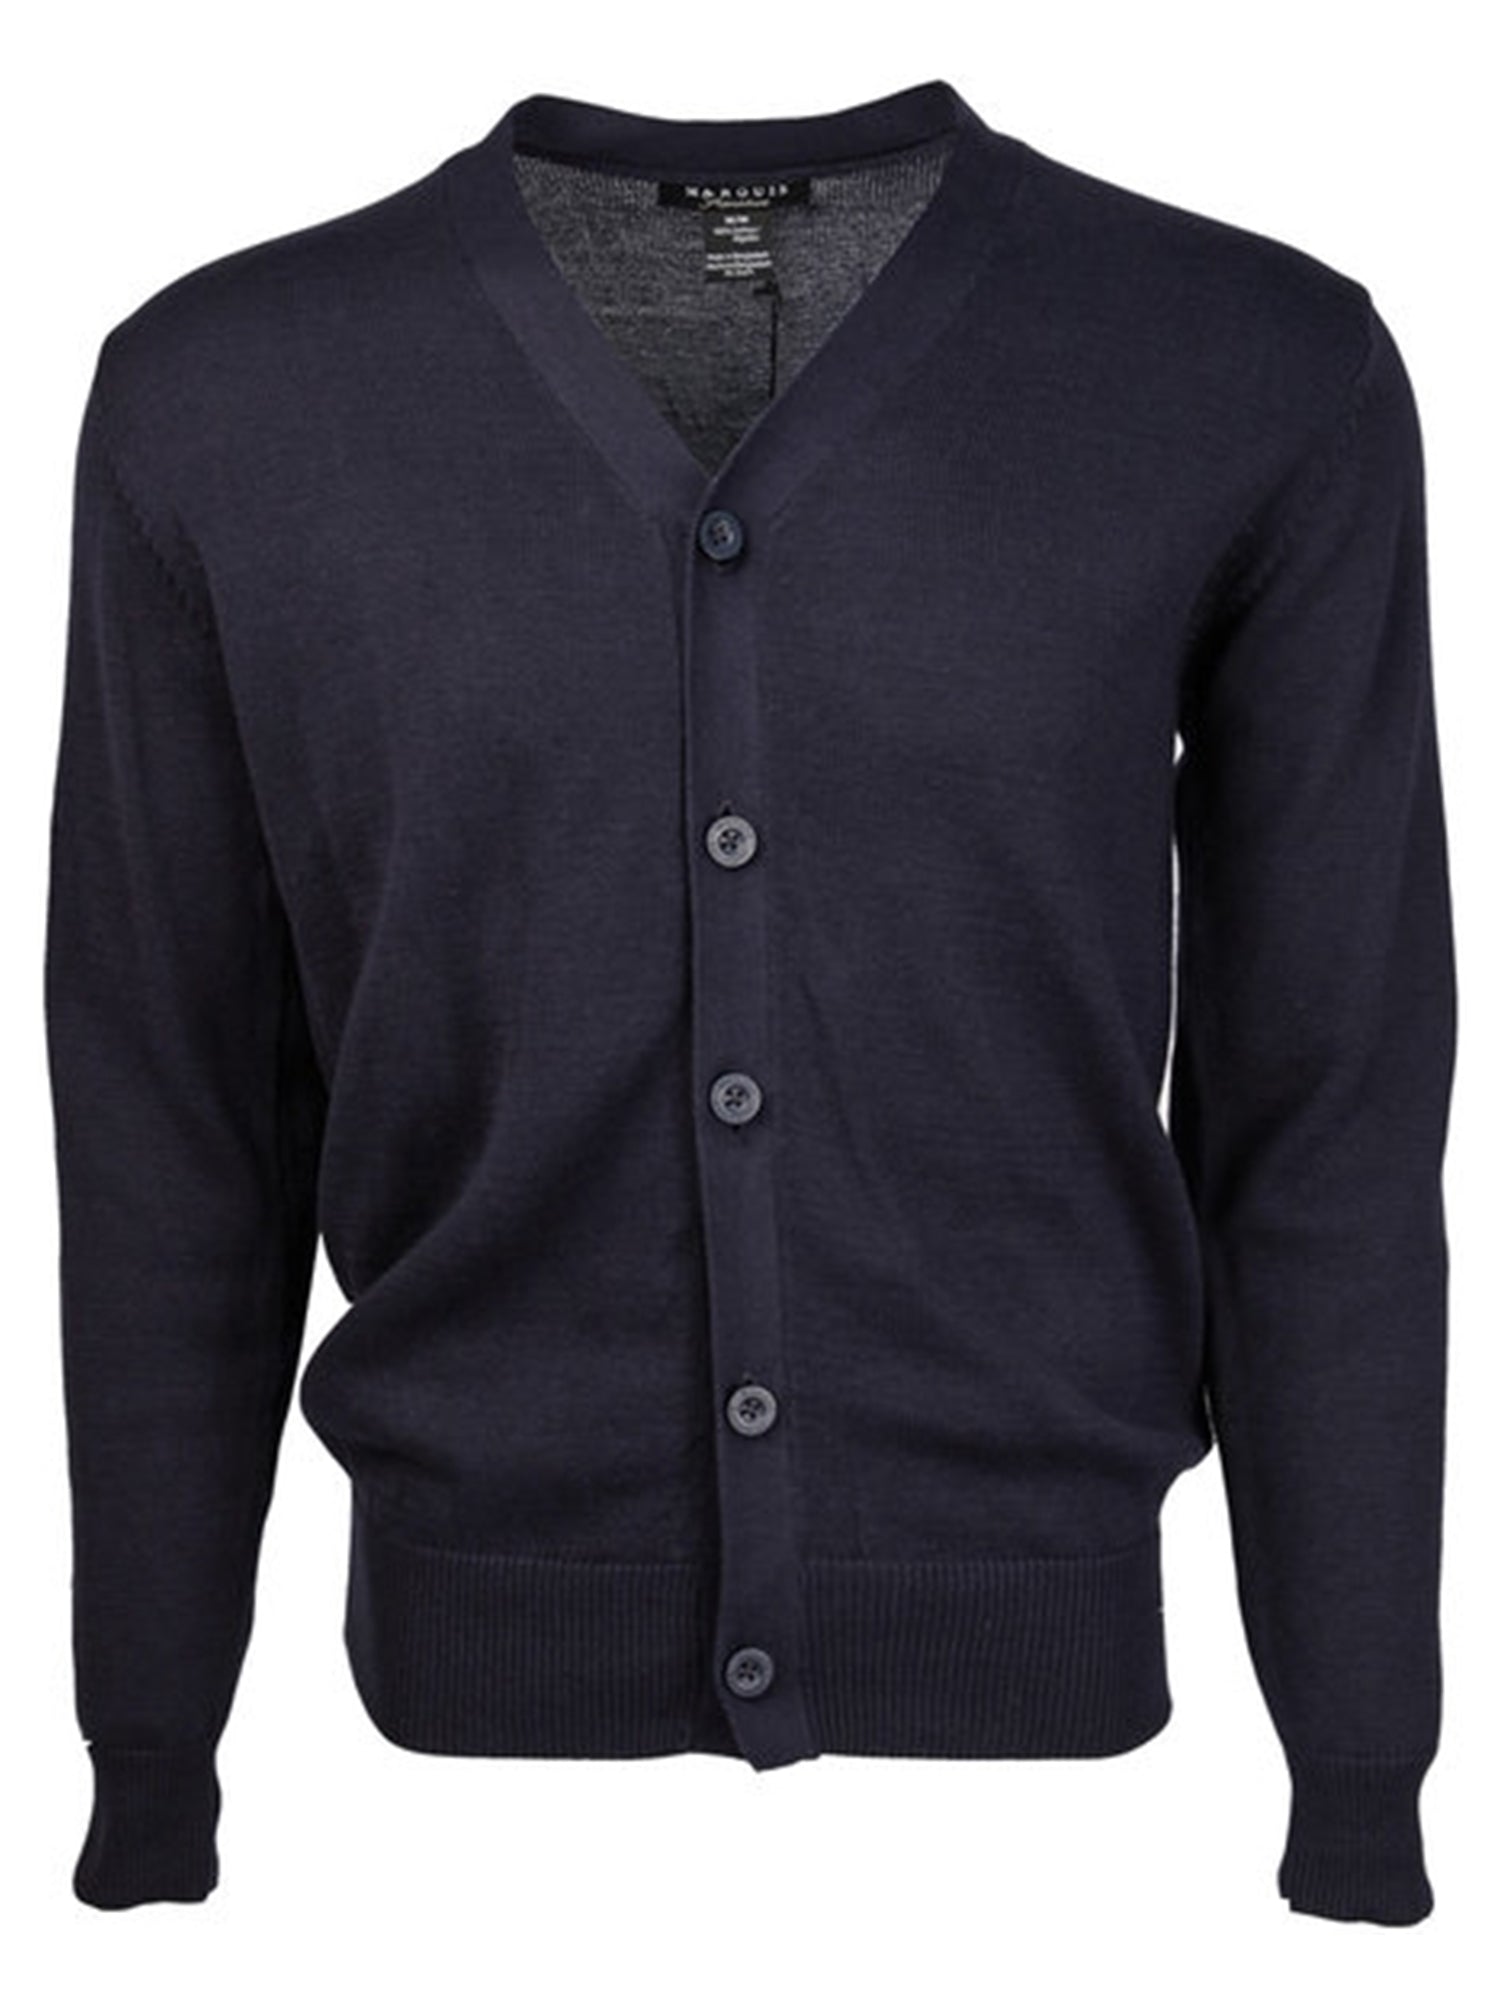 Solid Button Cotton Cardigan For Men From Marquis Sweater TheDapperTie Navy Small 